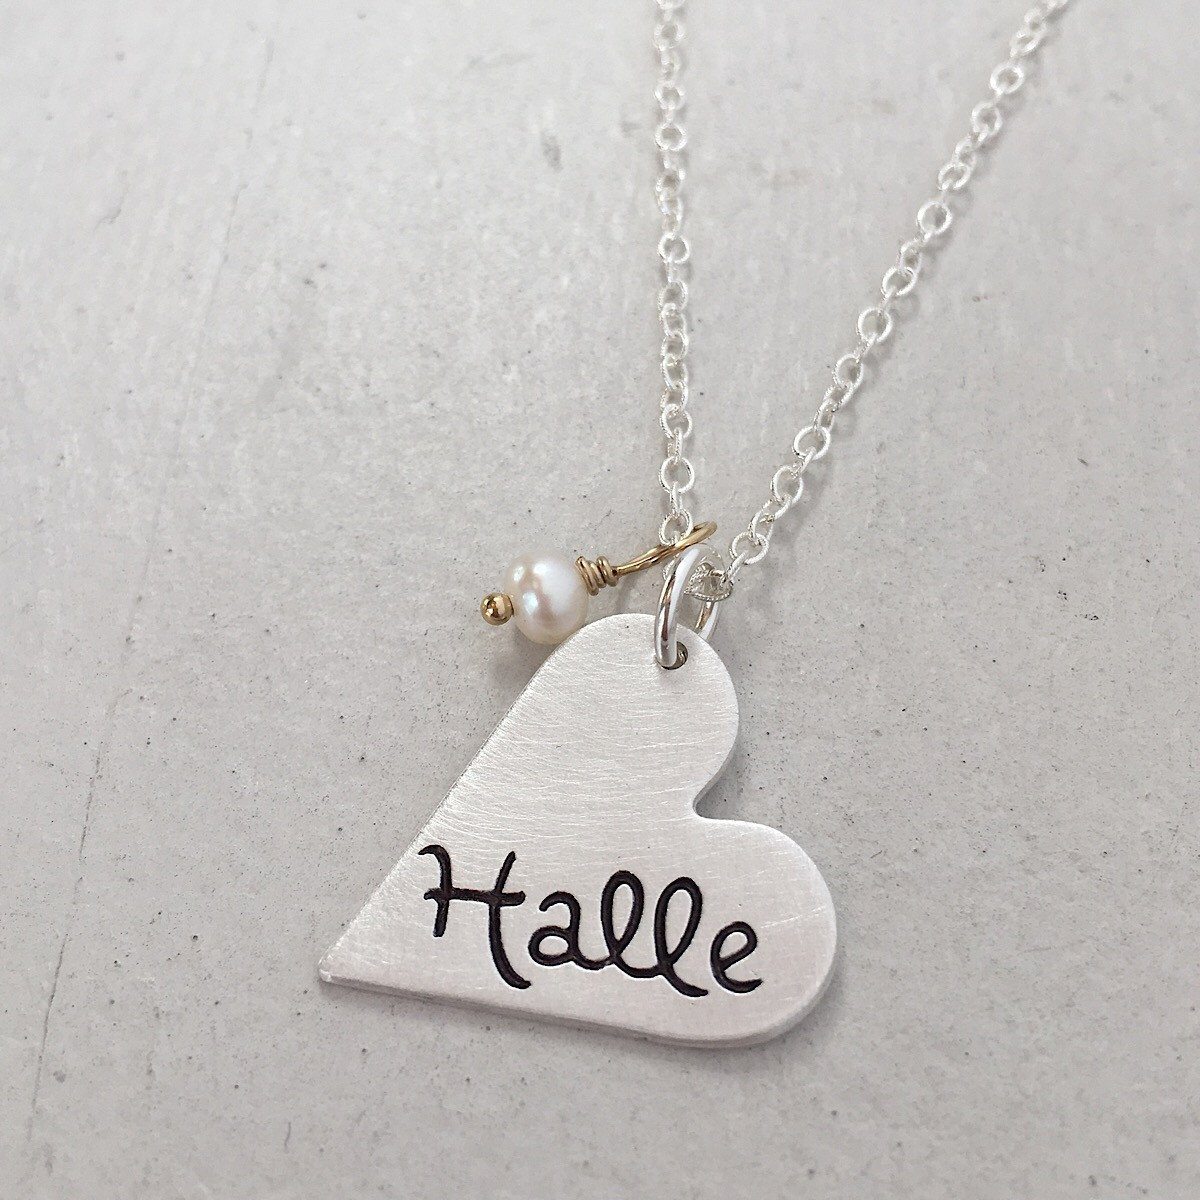 Heart Name Charm Necklace - IsabelleGraceJewelry